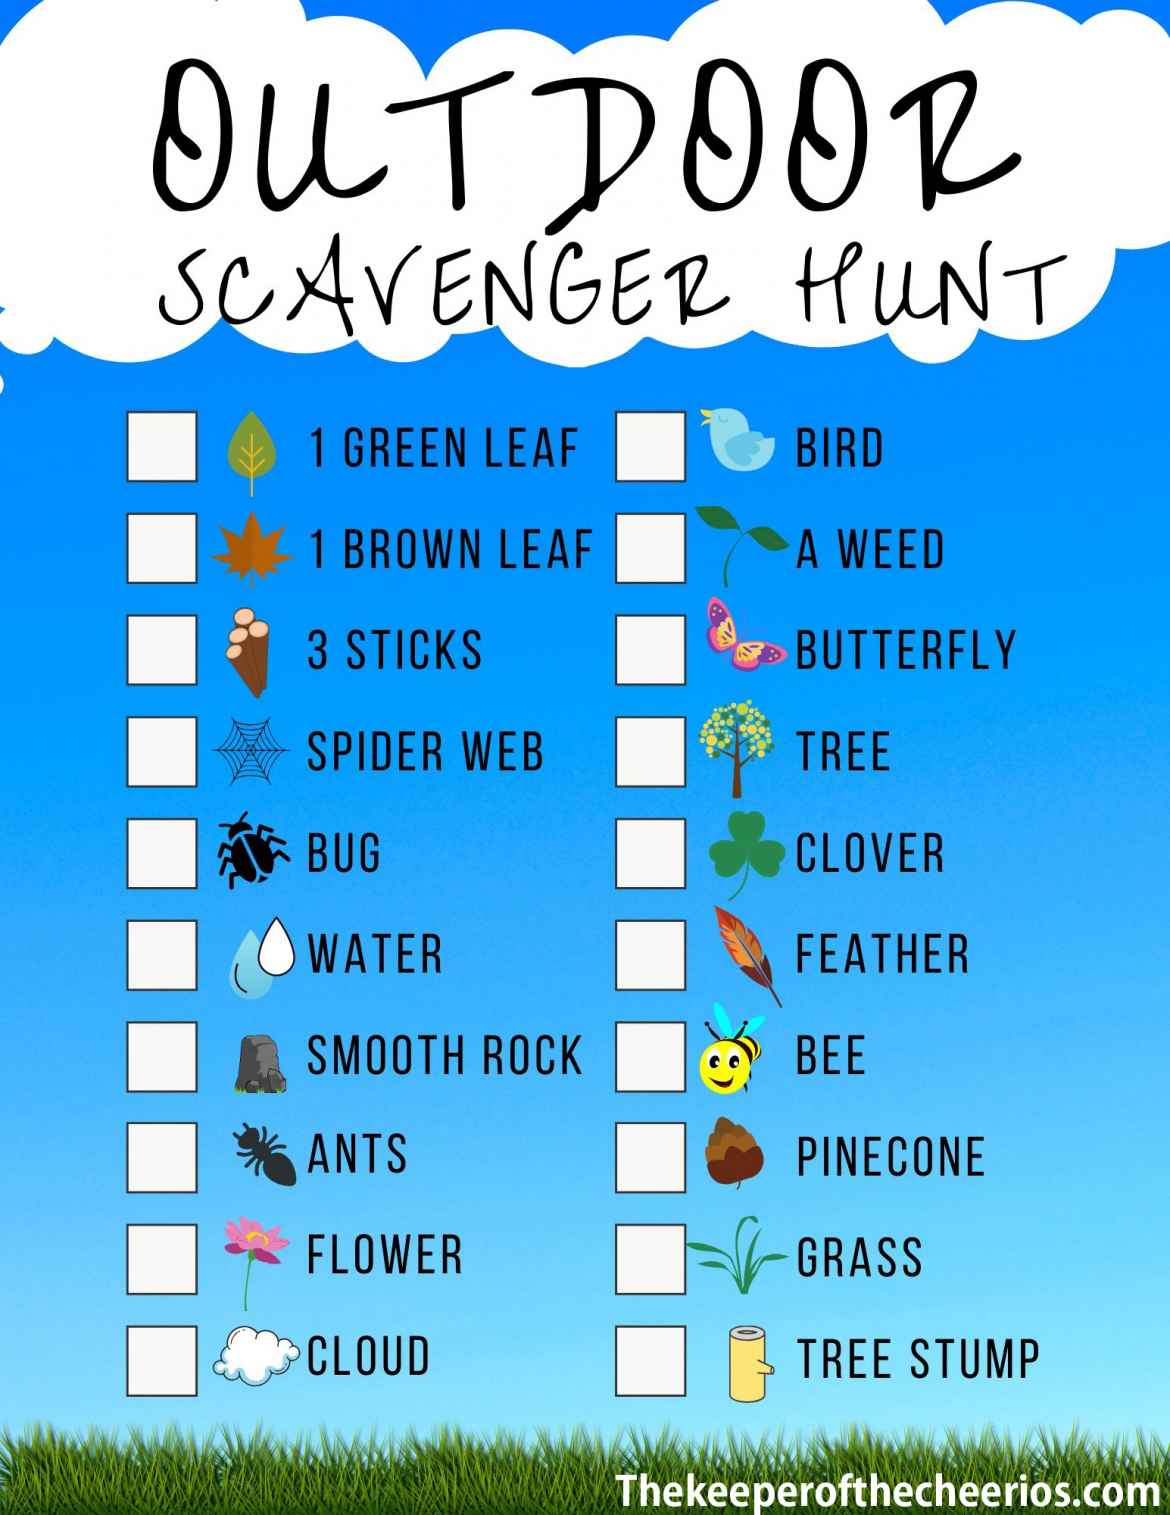 Backyard/Outdoor Scavenger Hunt Activity Sheet - The Keeper of the Cheerios